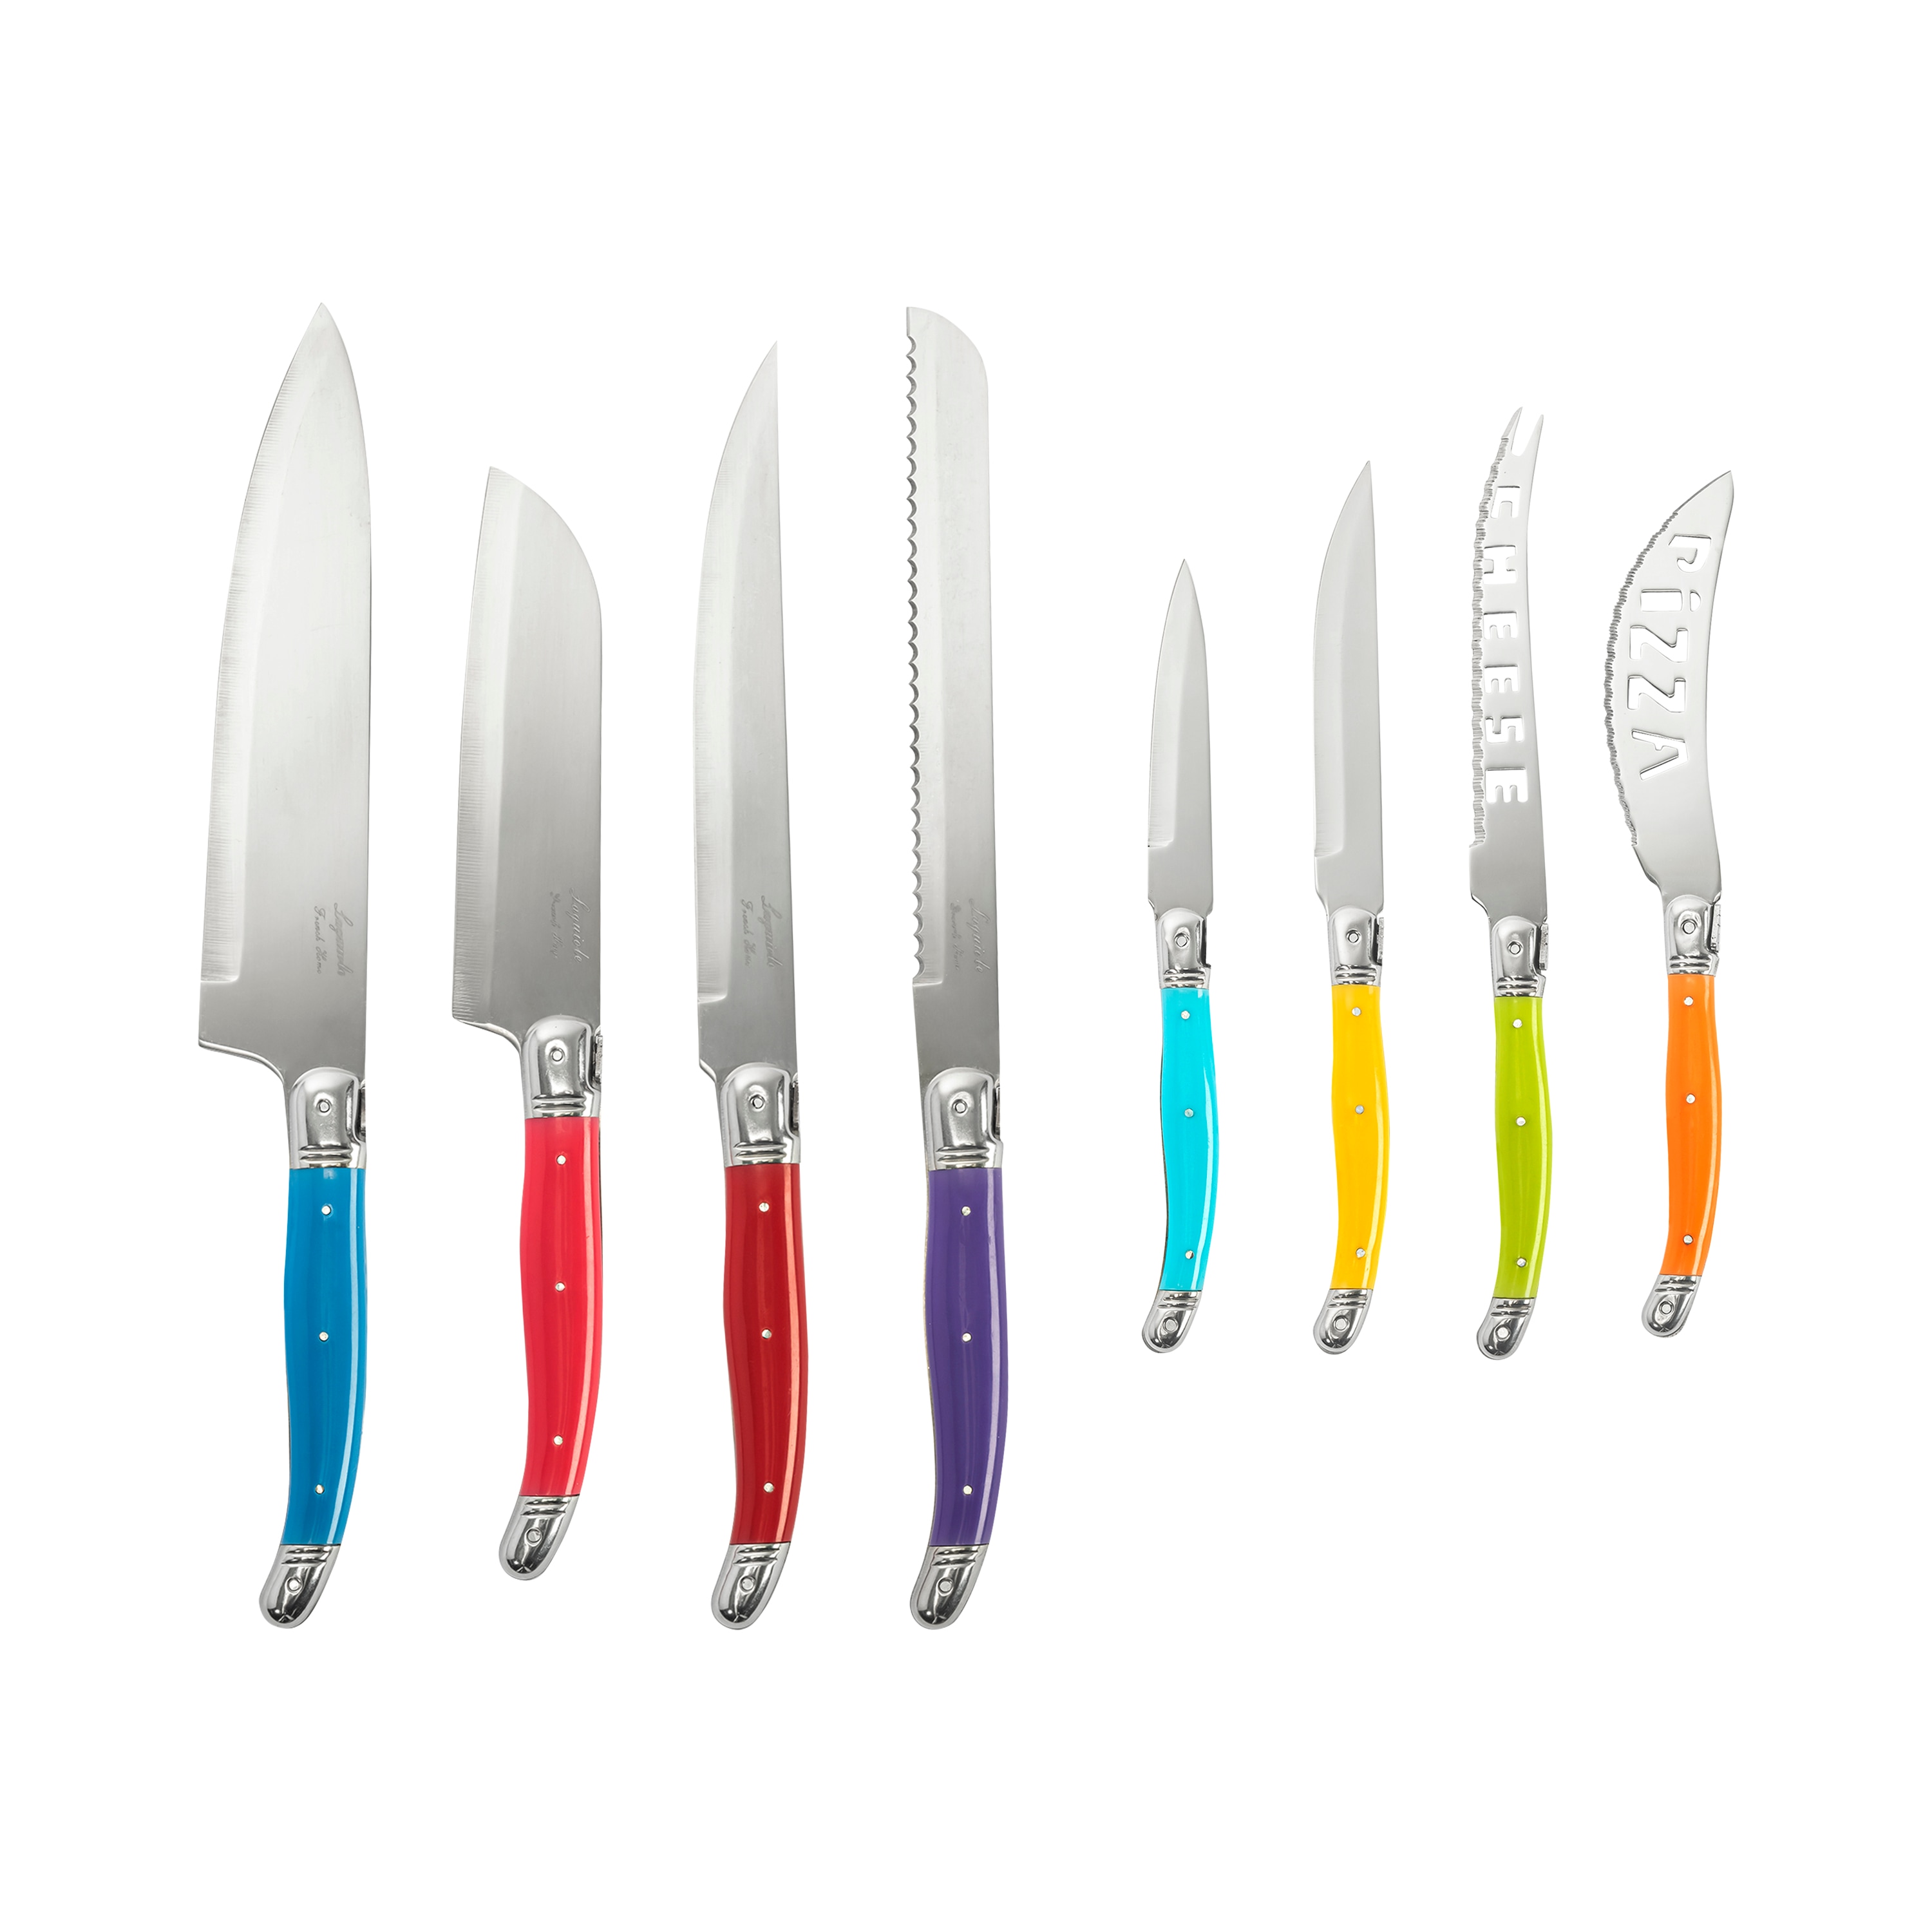 Cuisinart 12-piece Ceramic Knife Set with Guards and Shears - Nature 